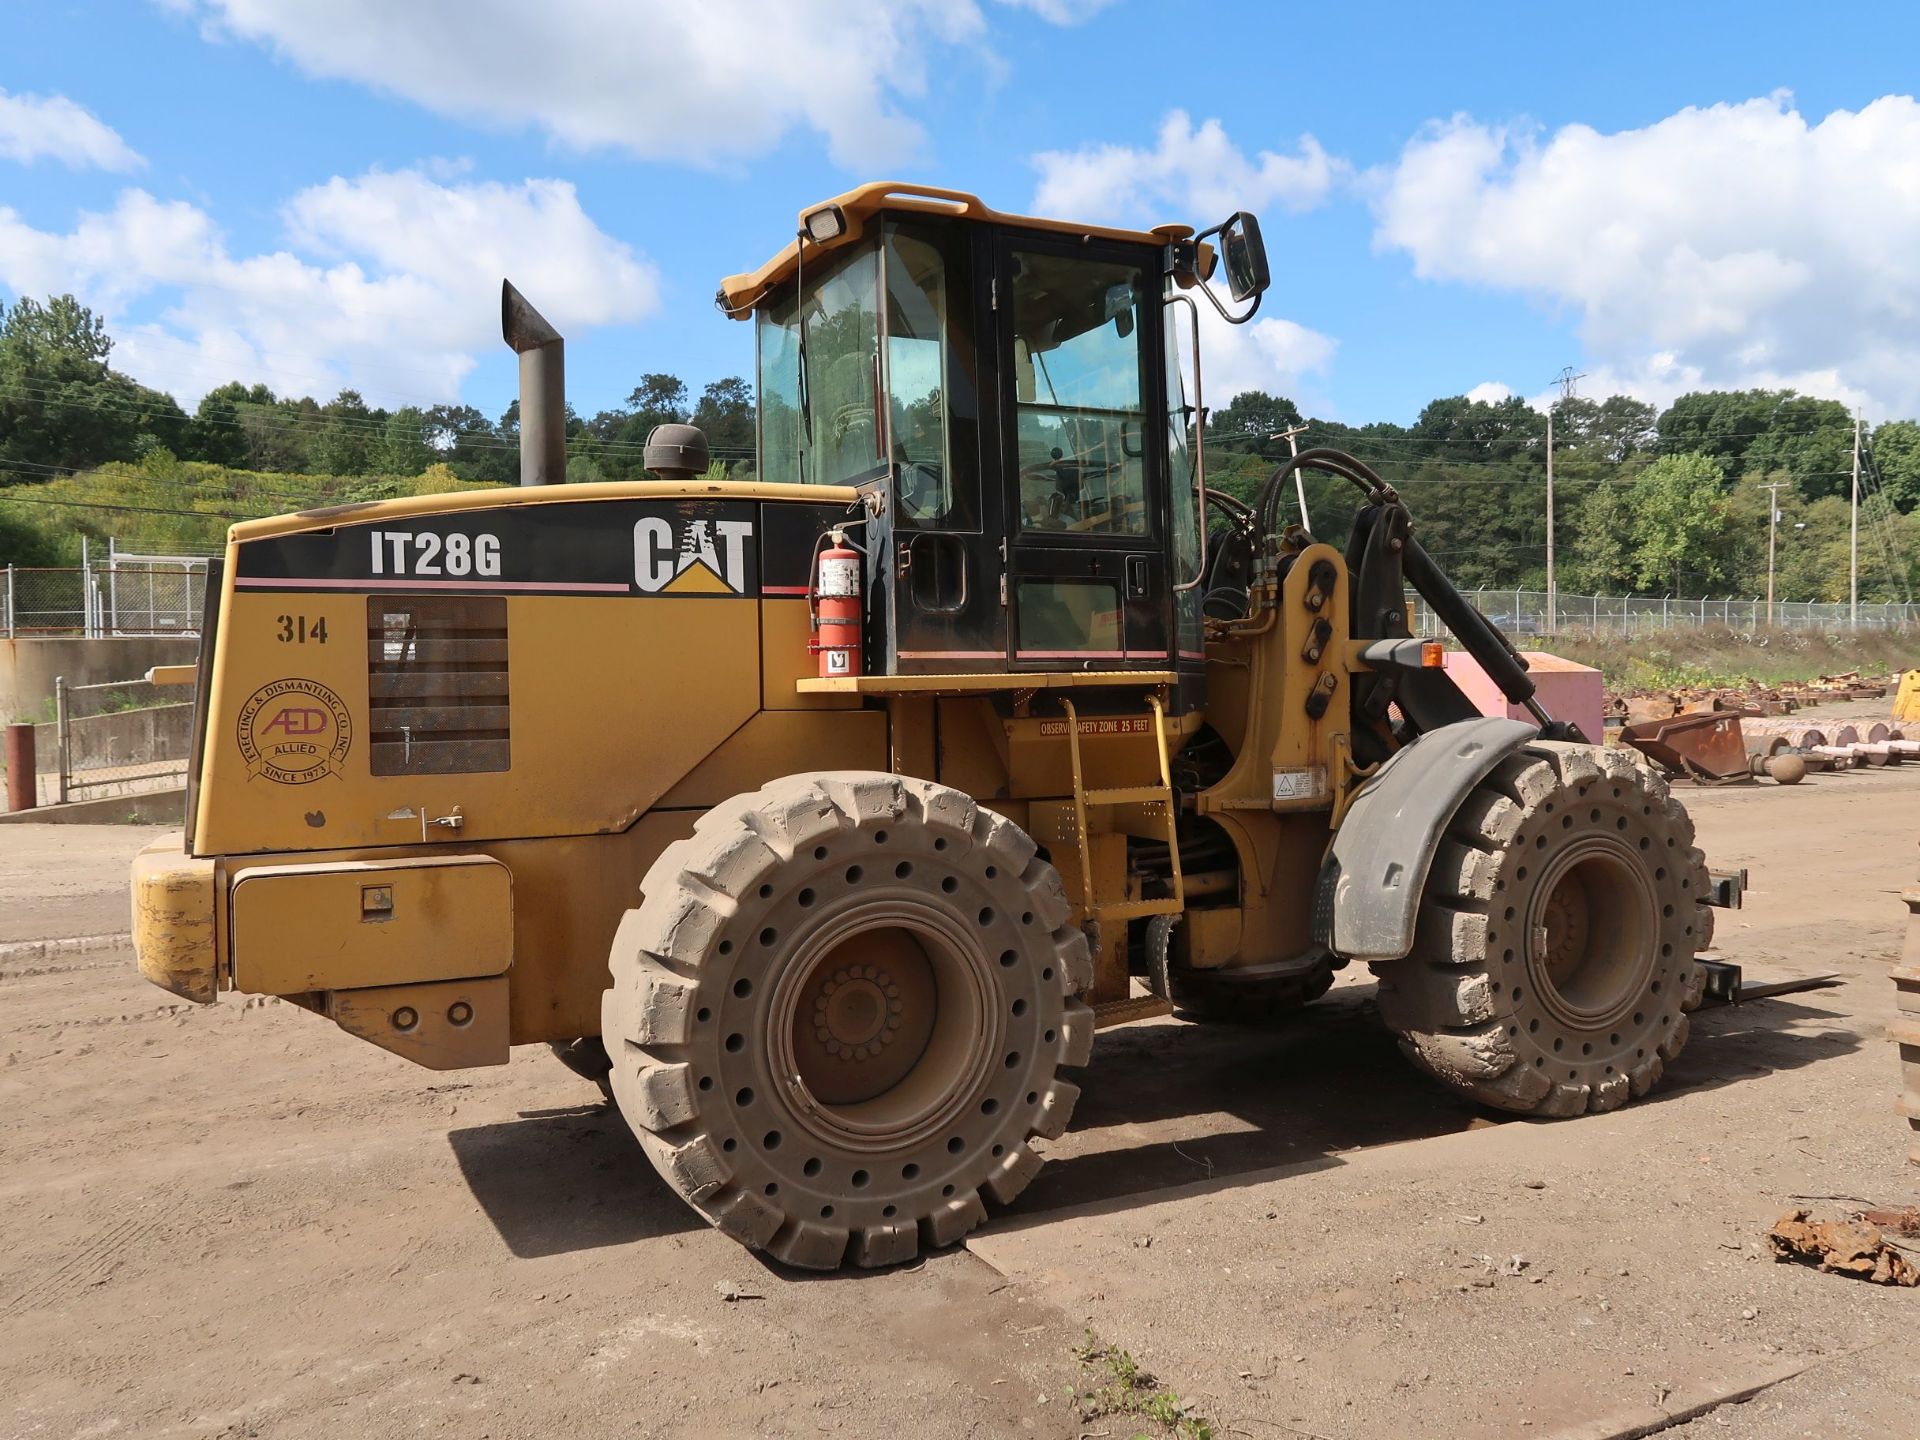 2002 CATERPILLAR MODEL IT28G ARTICULATING RUBBER TIRE WHEEL LOADER; S/N 4TF76145 OR CAT - Image 4 of 11